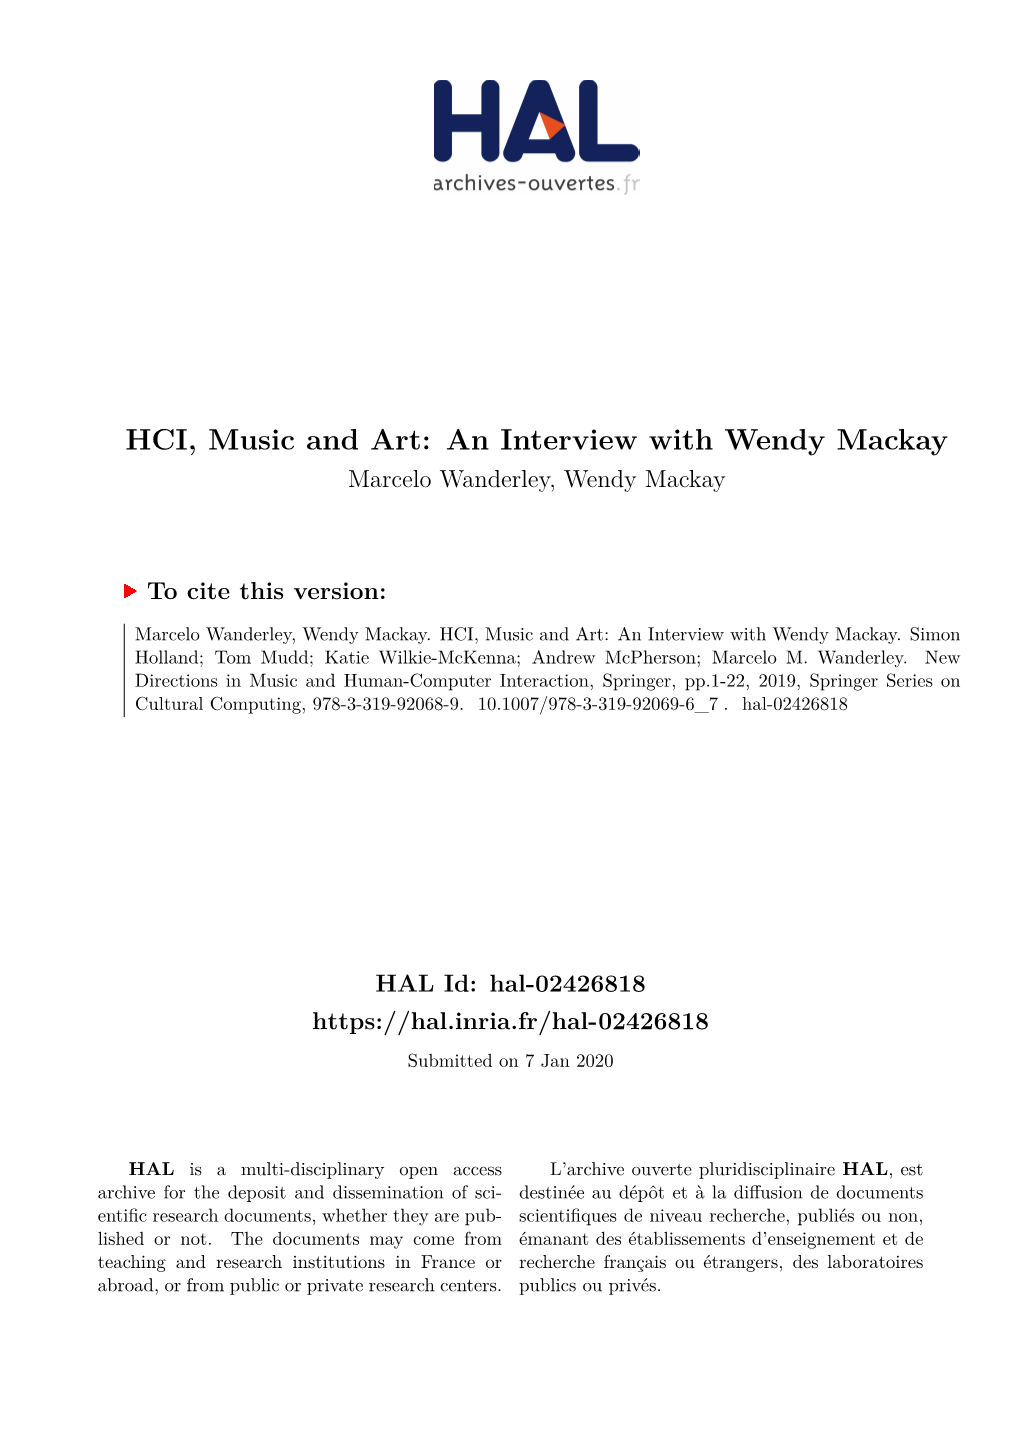 HCI, Music and Art: an Interview with Wendy Mackay Marcelo Wanderley, Wendy Mackay